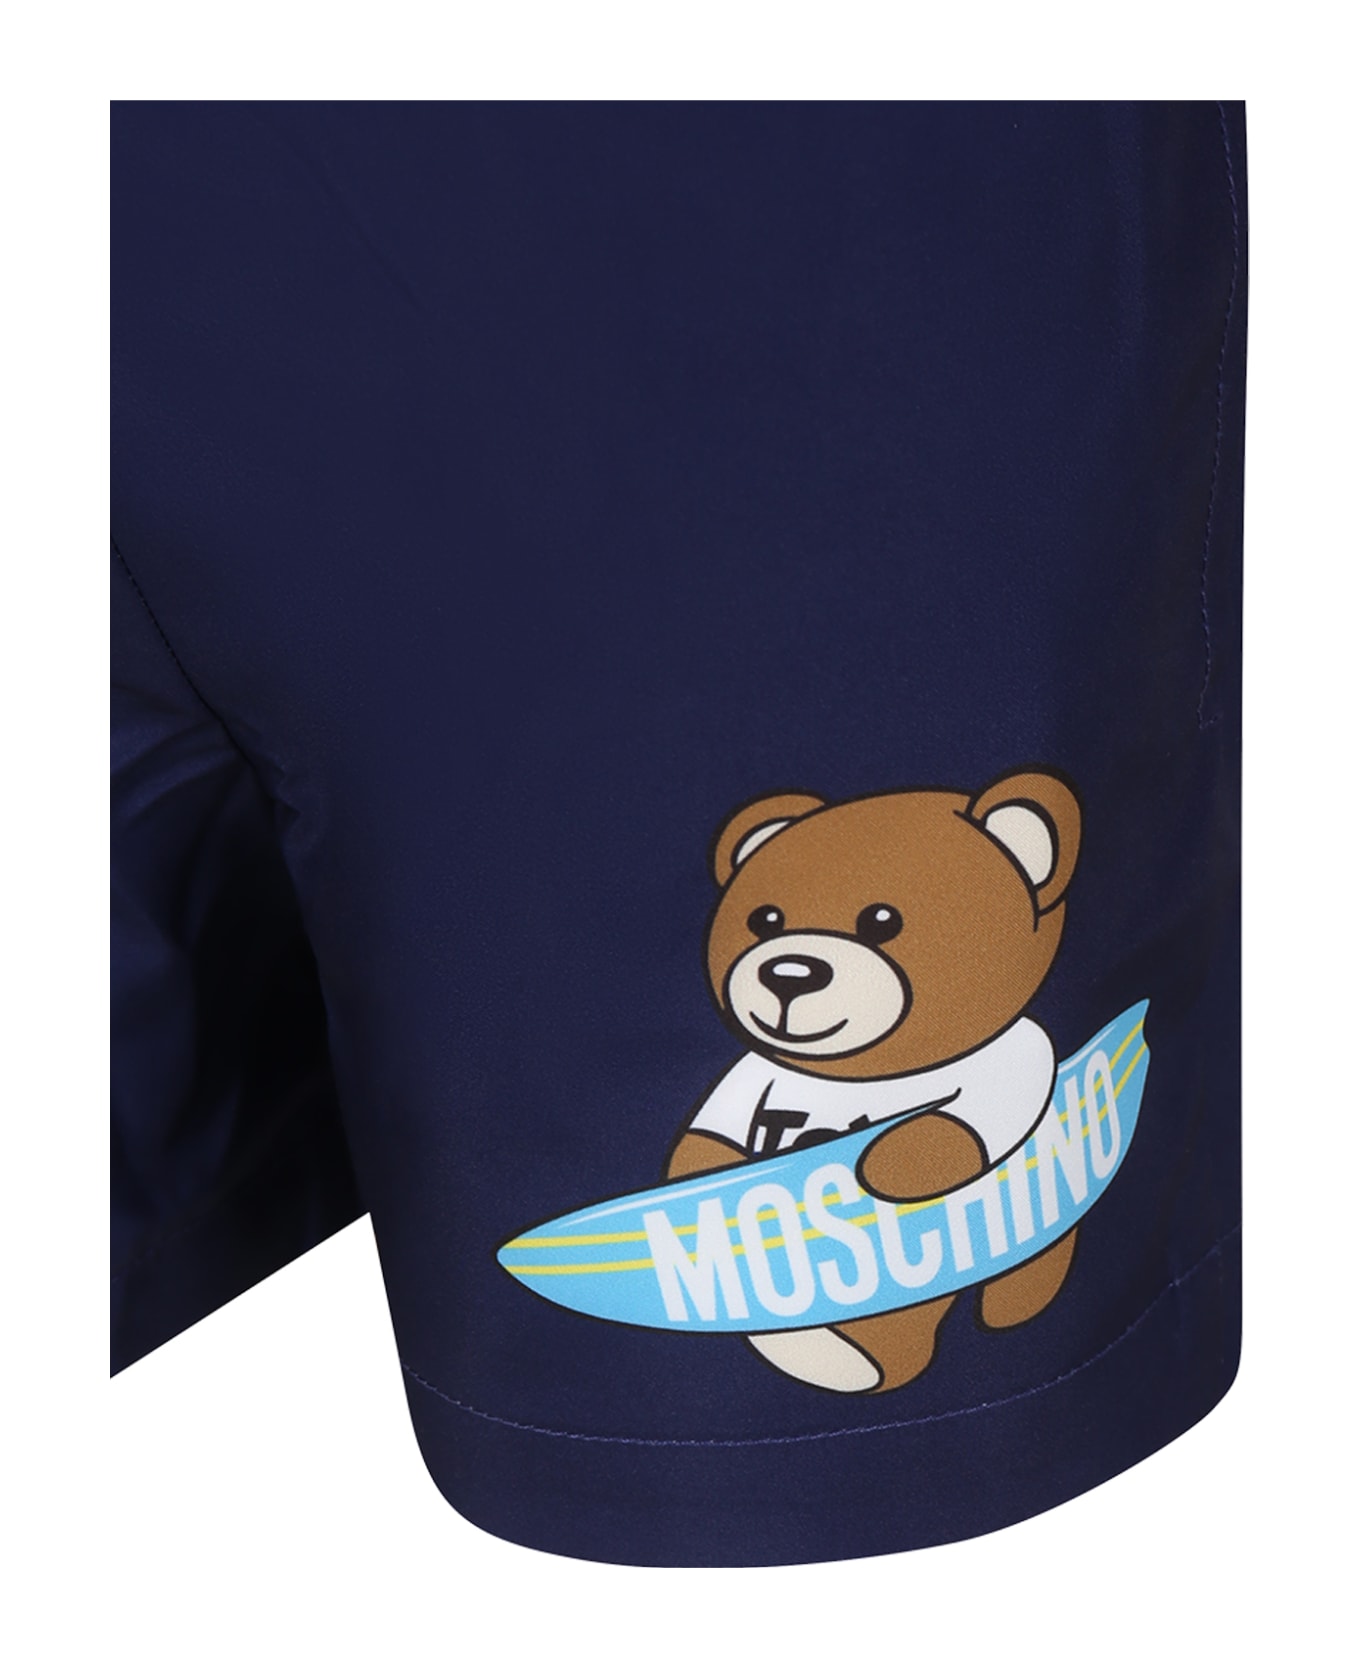 Moschino Blue Swimshorts For Boy With Teddy Bear And Logo - Blue 水着